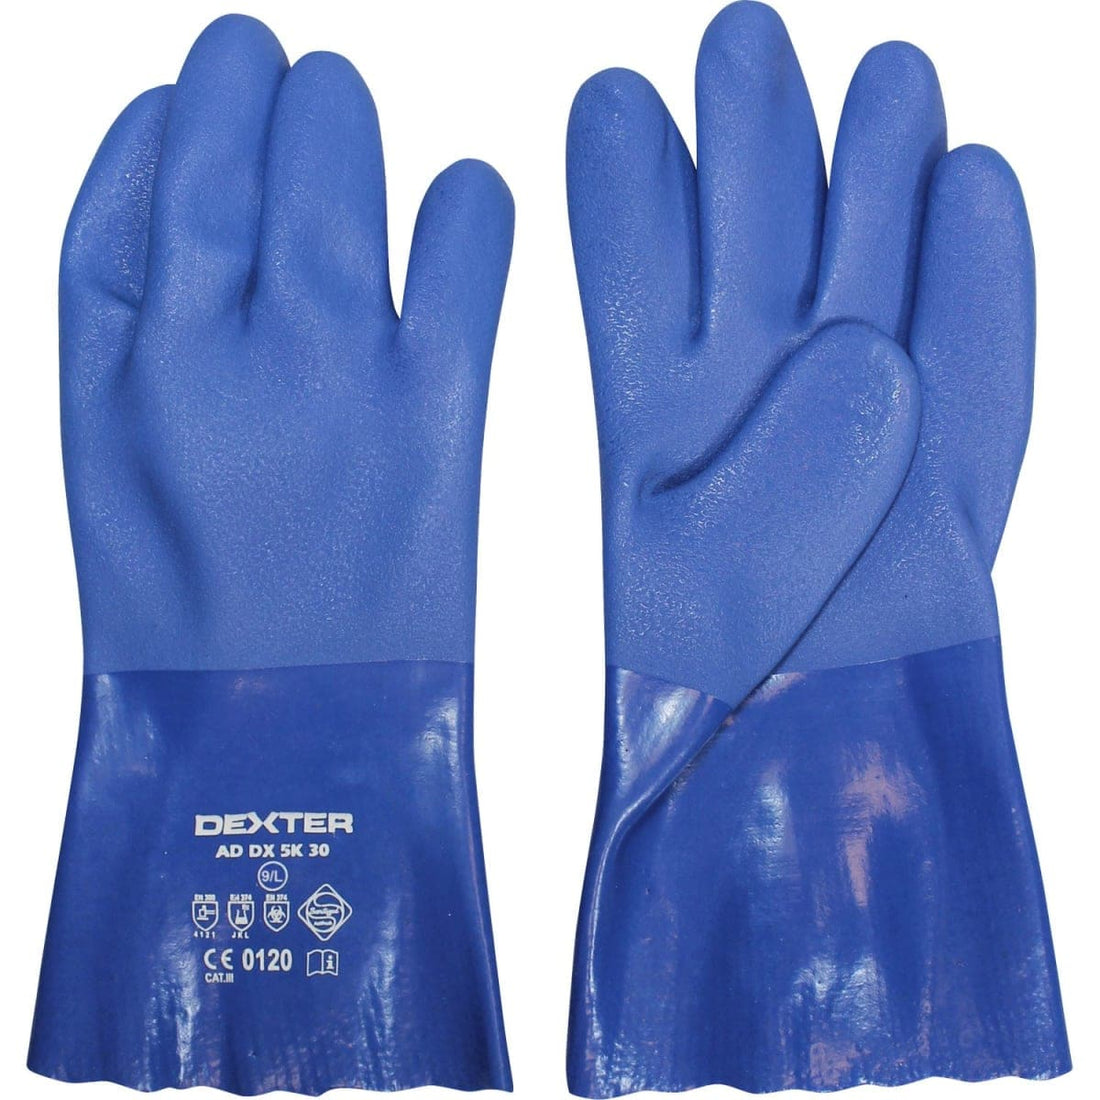 DEXTER LATEX GLOVES WITH PVC COATING, SIZE 11, XXL - best price from Maltashopper.com BR400001190